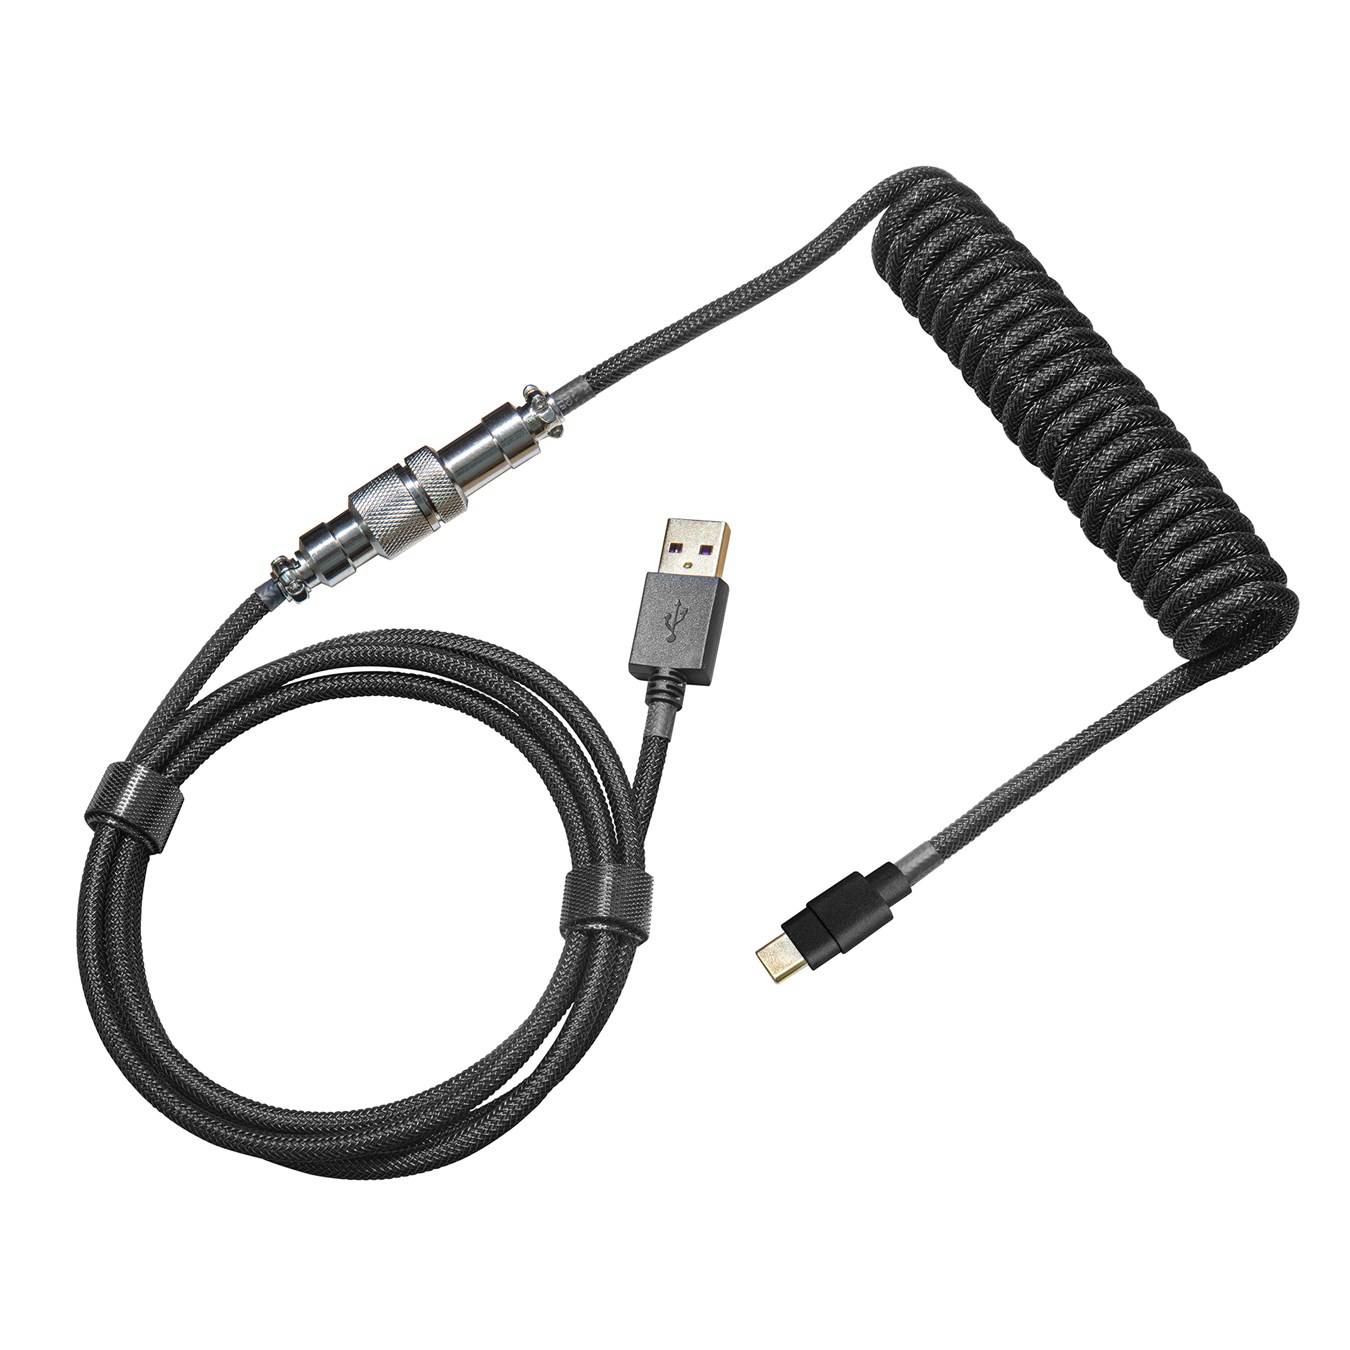 COOLER MASTER COILED CABLE SHADOW BLACK - KB-CBZ1